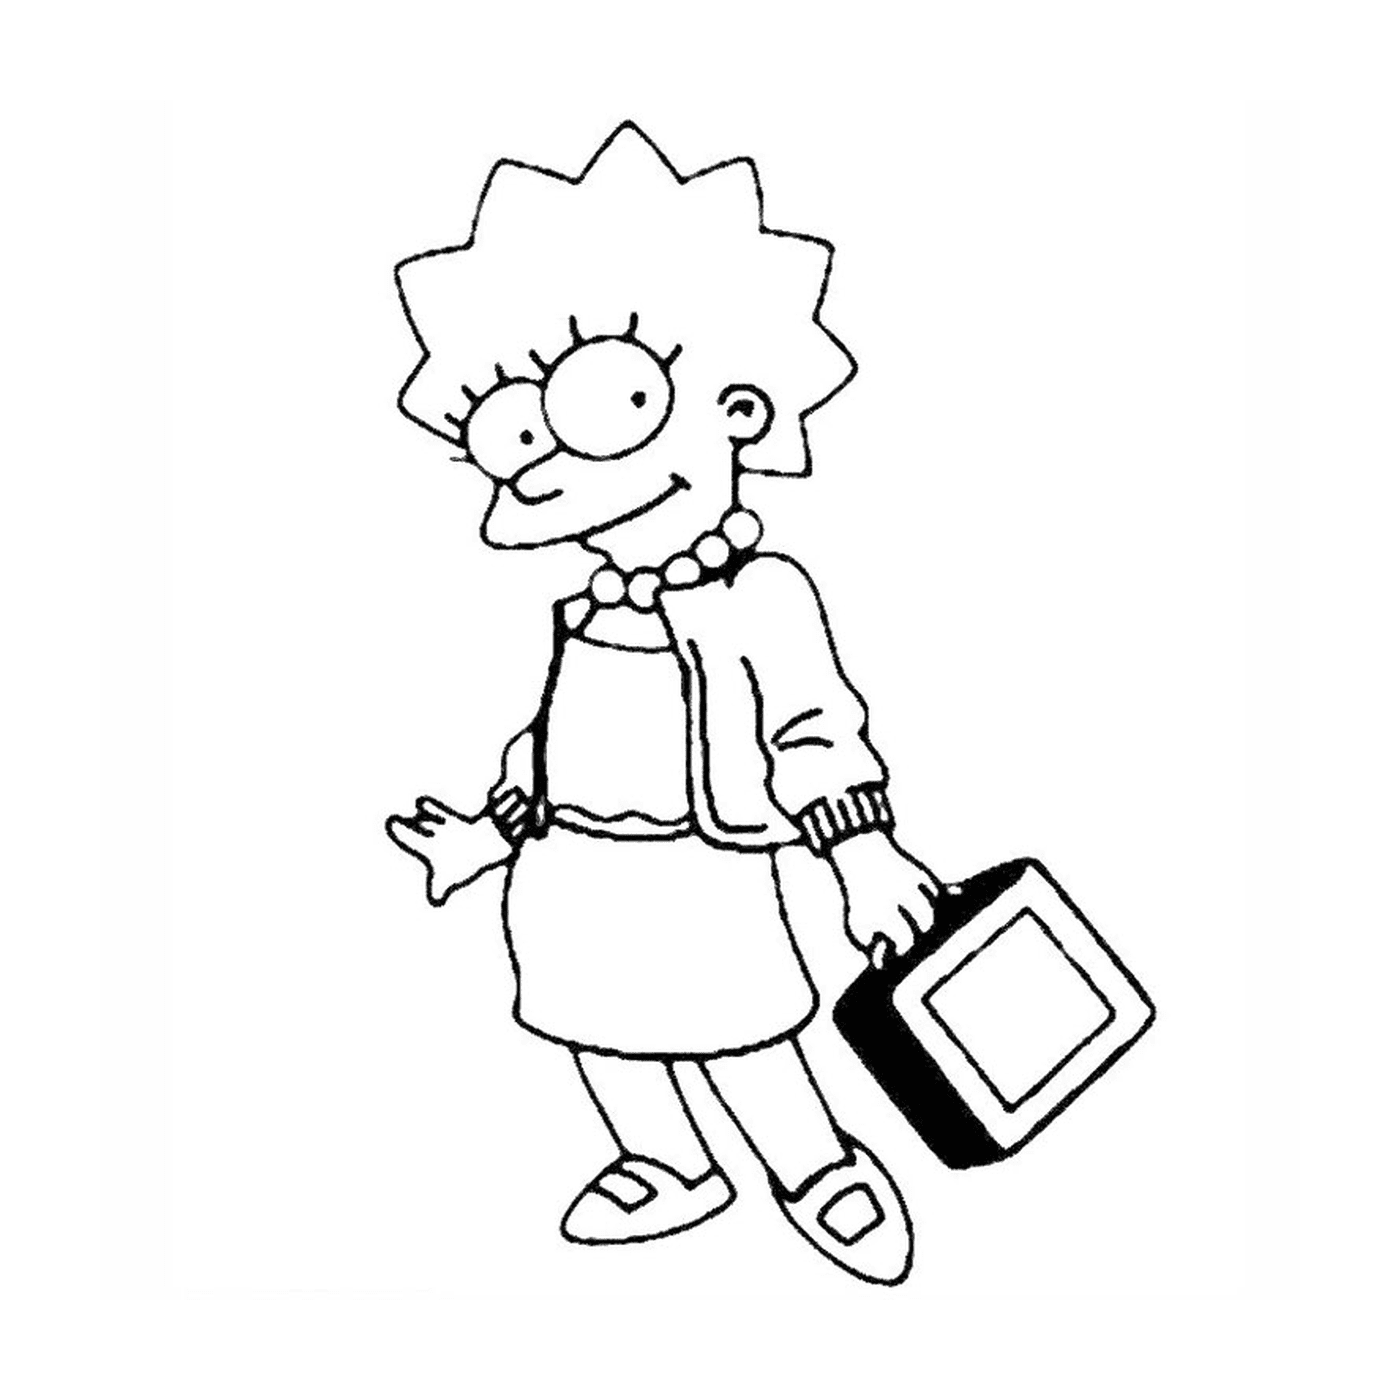  Lisa Simpson with a suitcase 